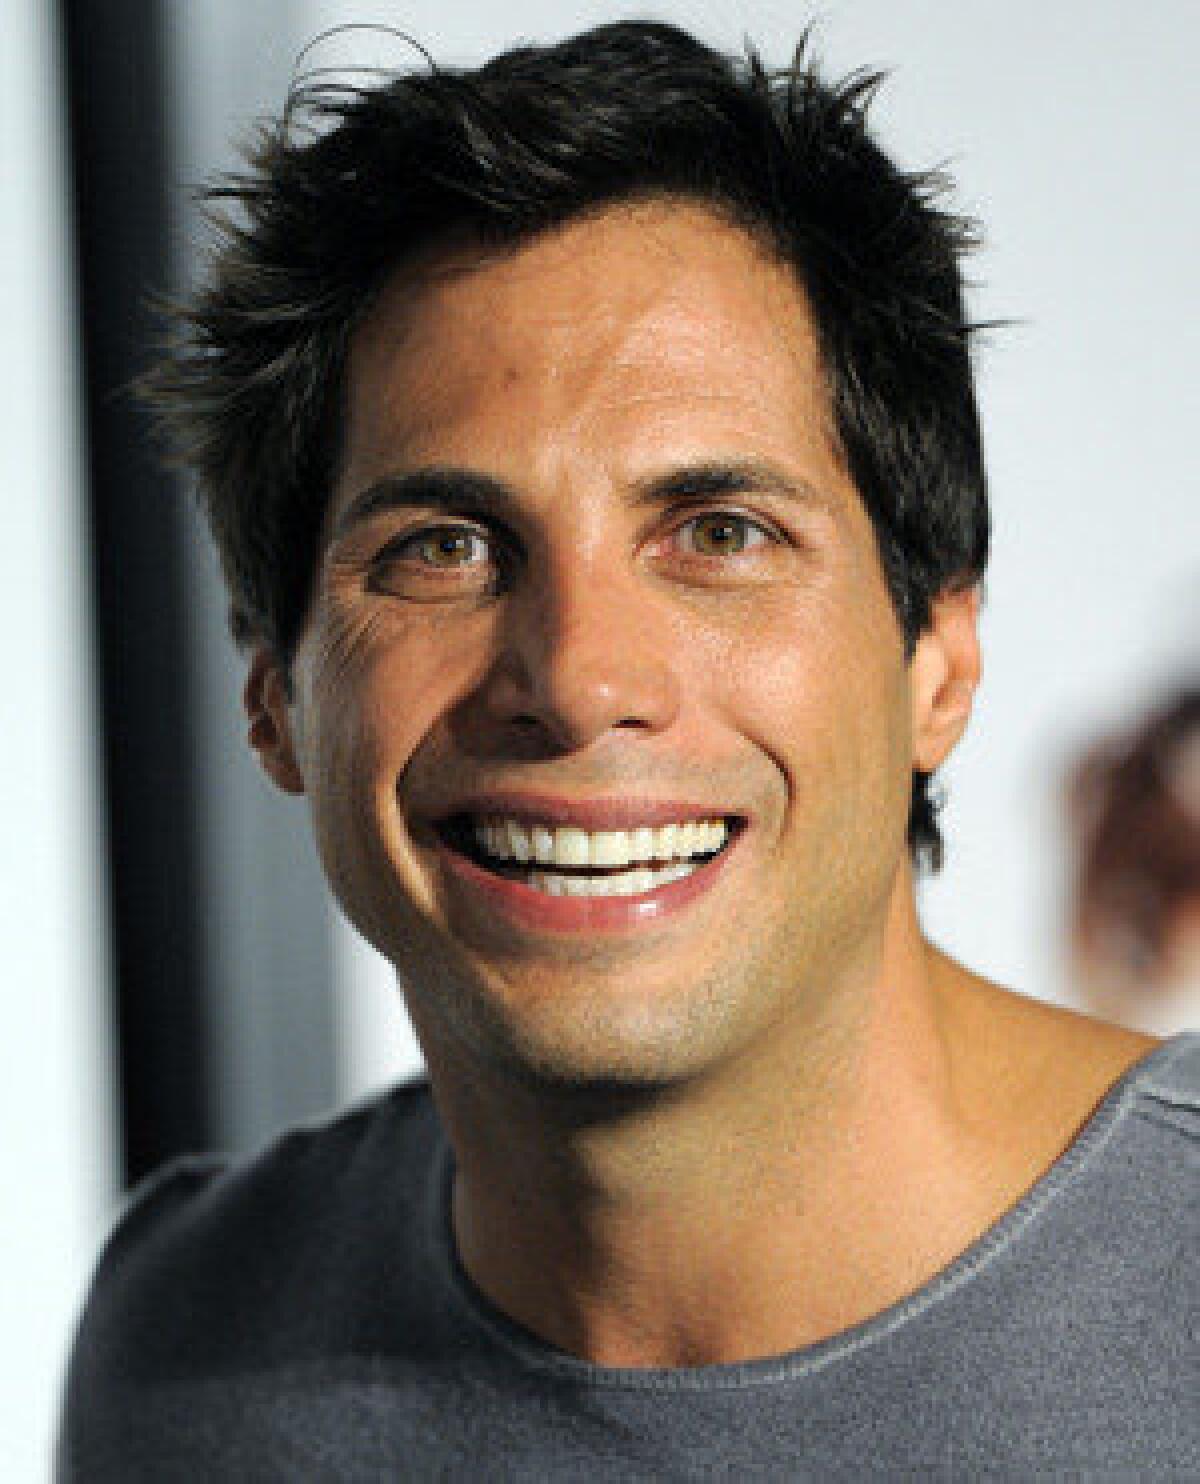 "Girls Gone Wild" creator Joe Francis is convicted of nearly half a dozen misdemeanor counts in connection with assaults on three women.